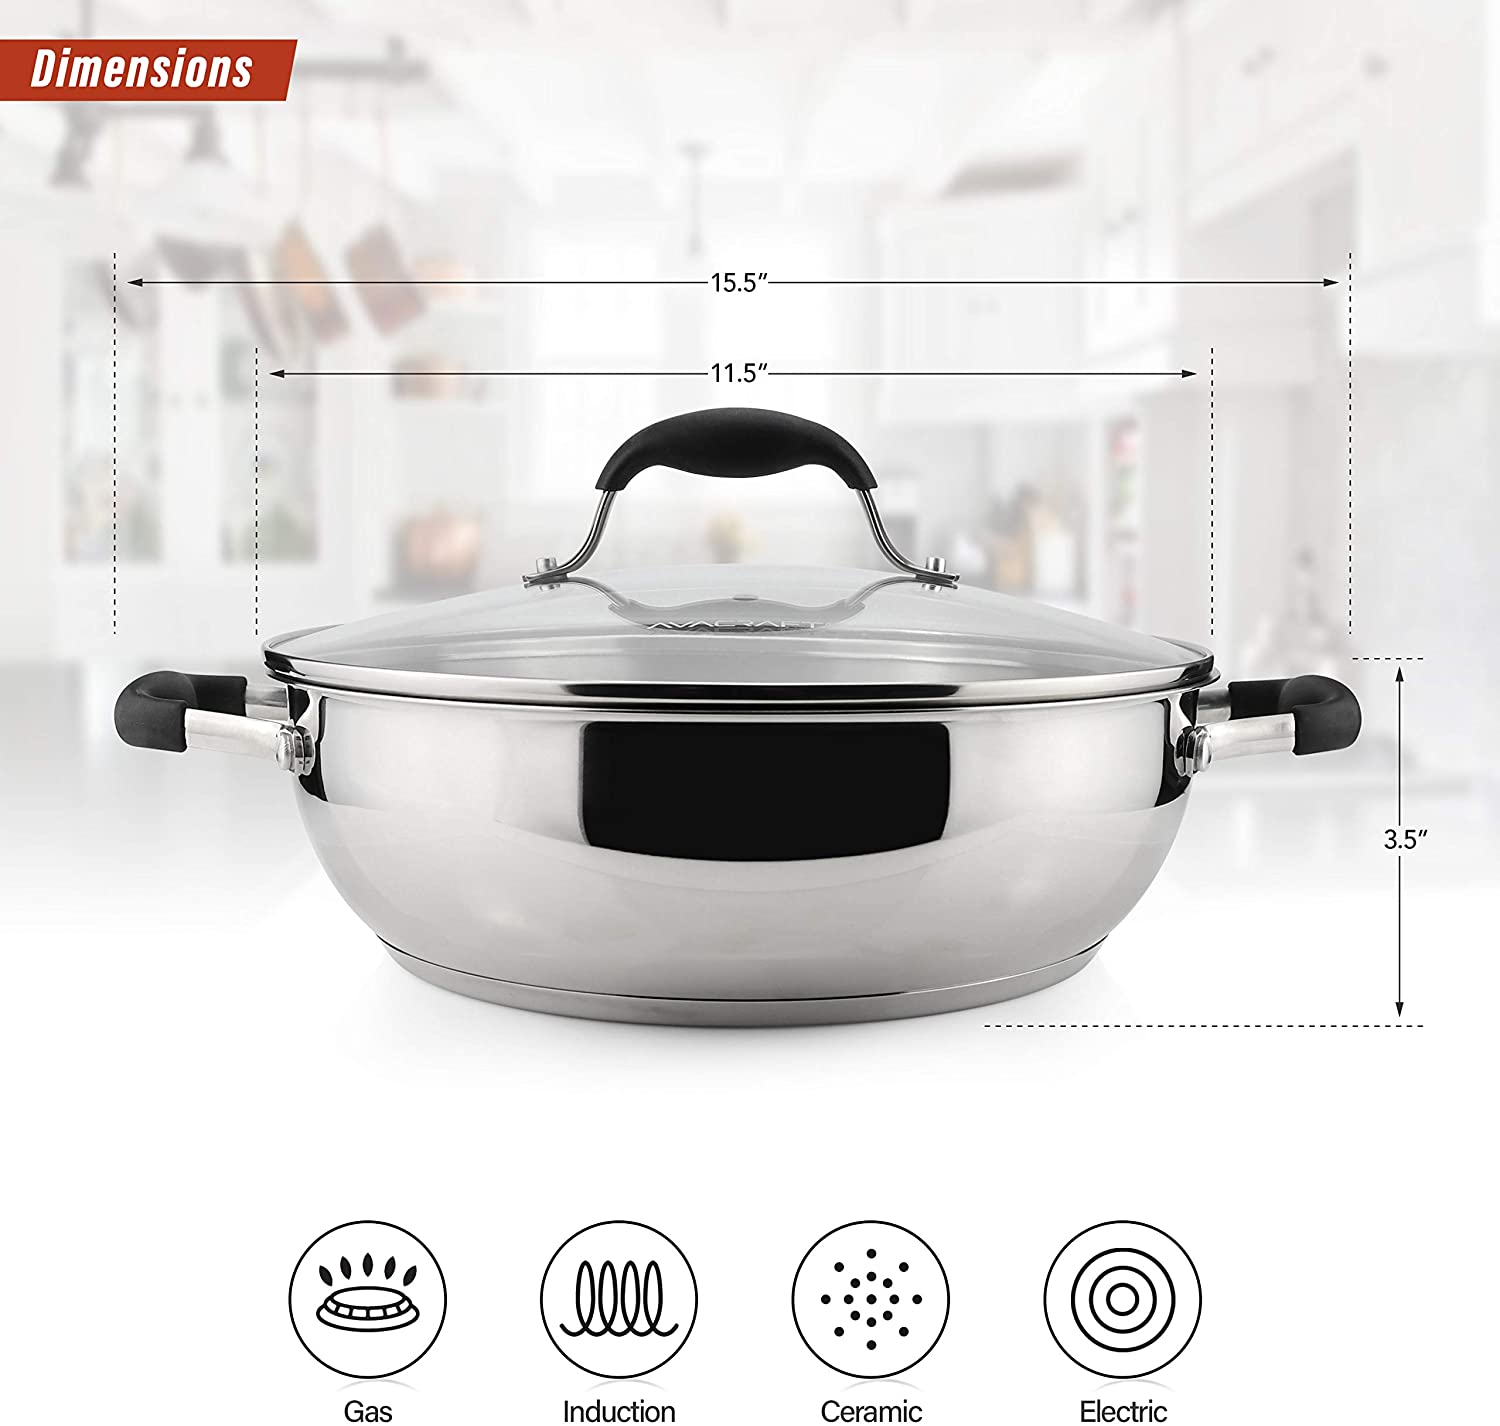 AVACRAFT 18/10 Stainless Steel Frying Pan with Lid and Side Spouts (Fi